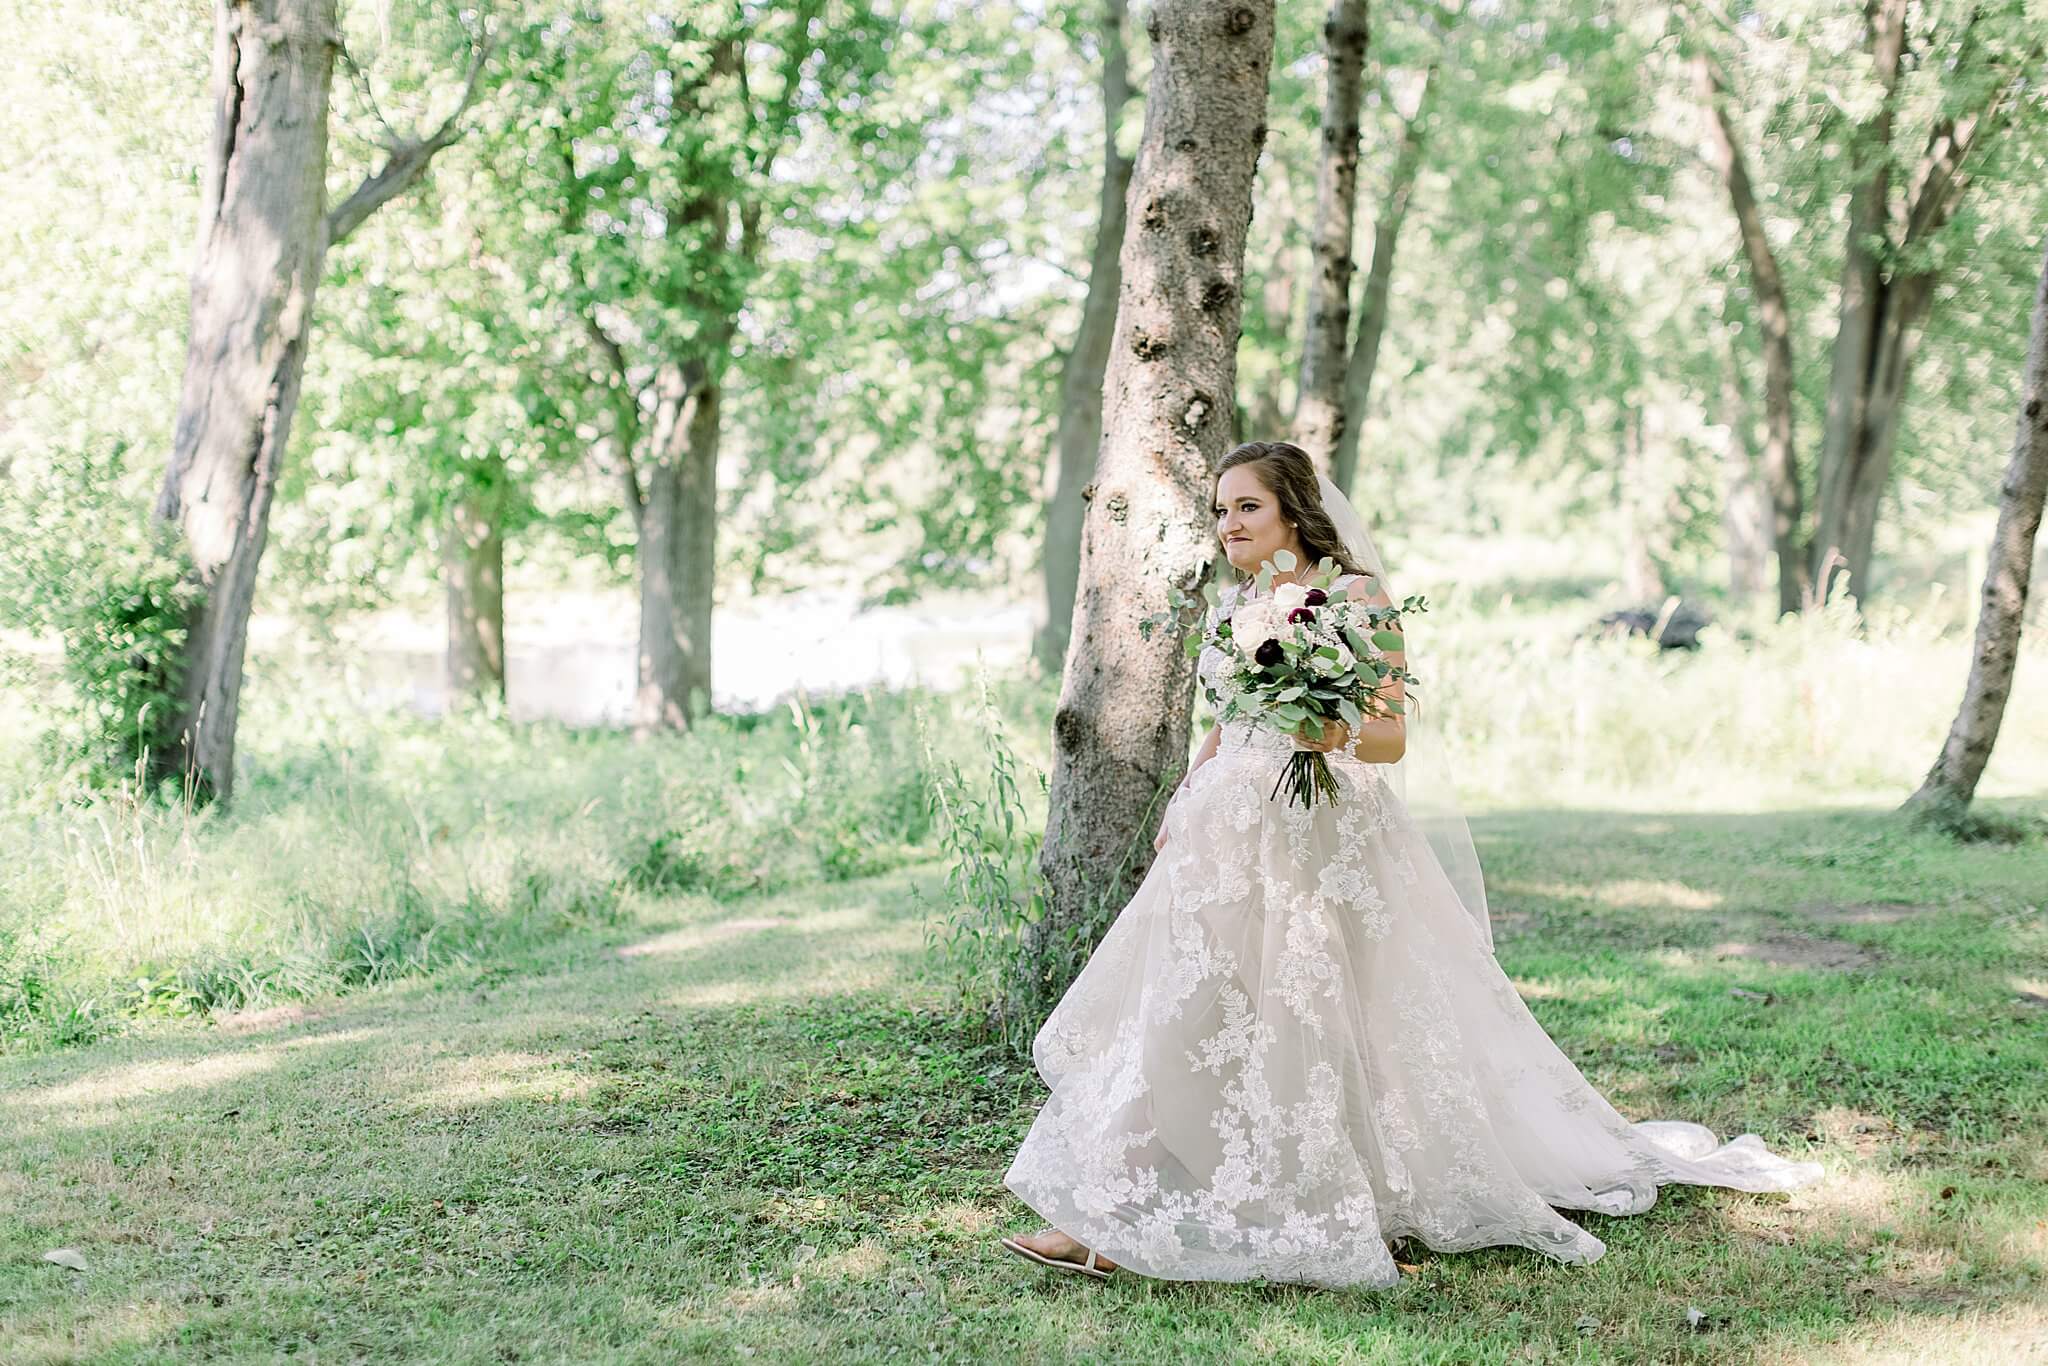 Bride cries while walking to see groom during first look at Michigan Summer Backyard Wedding.